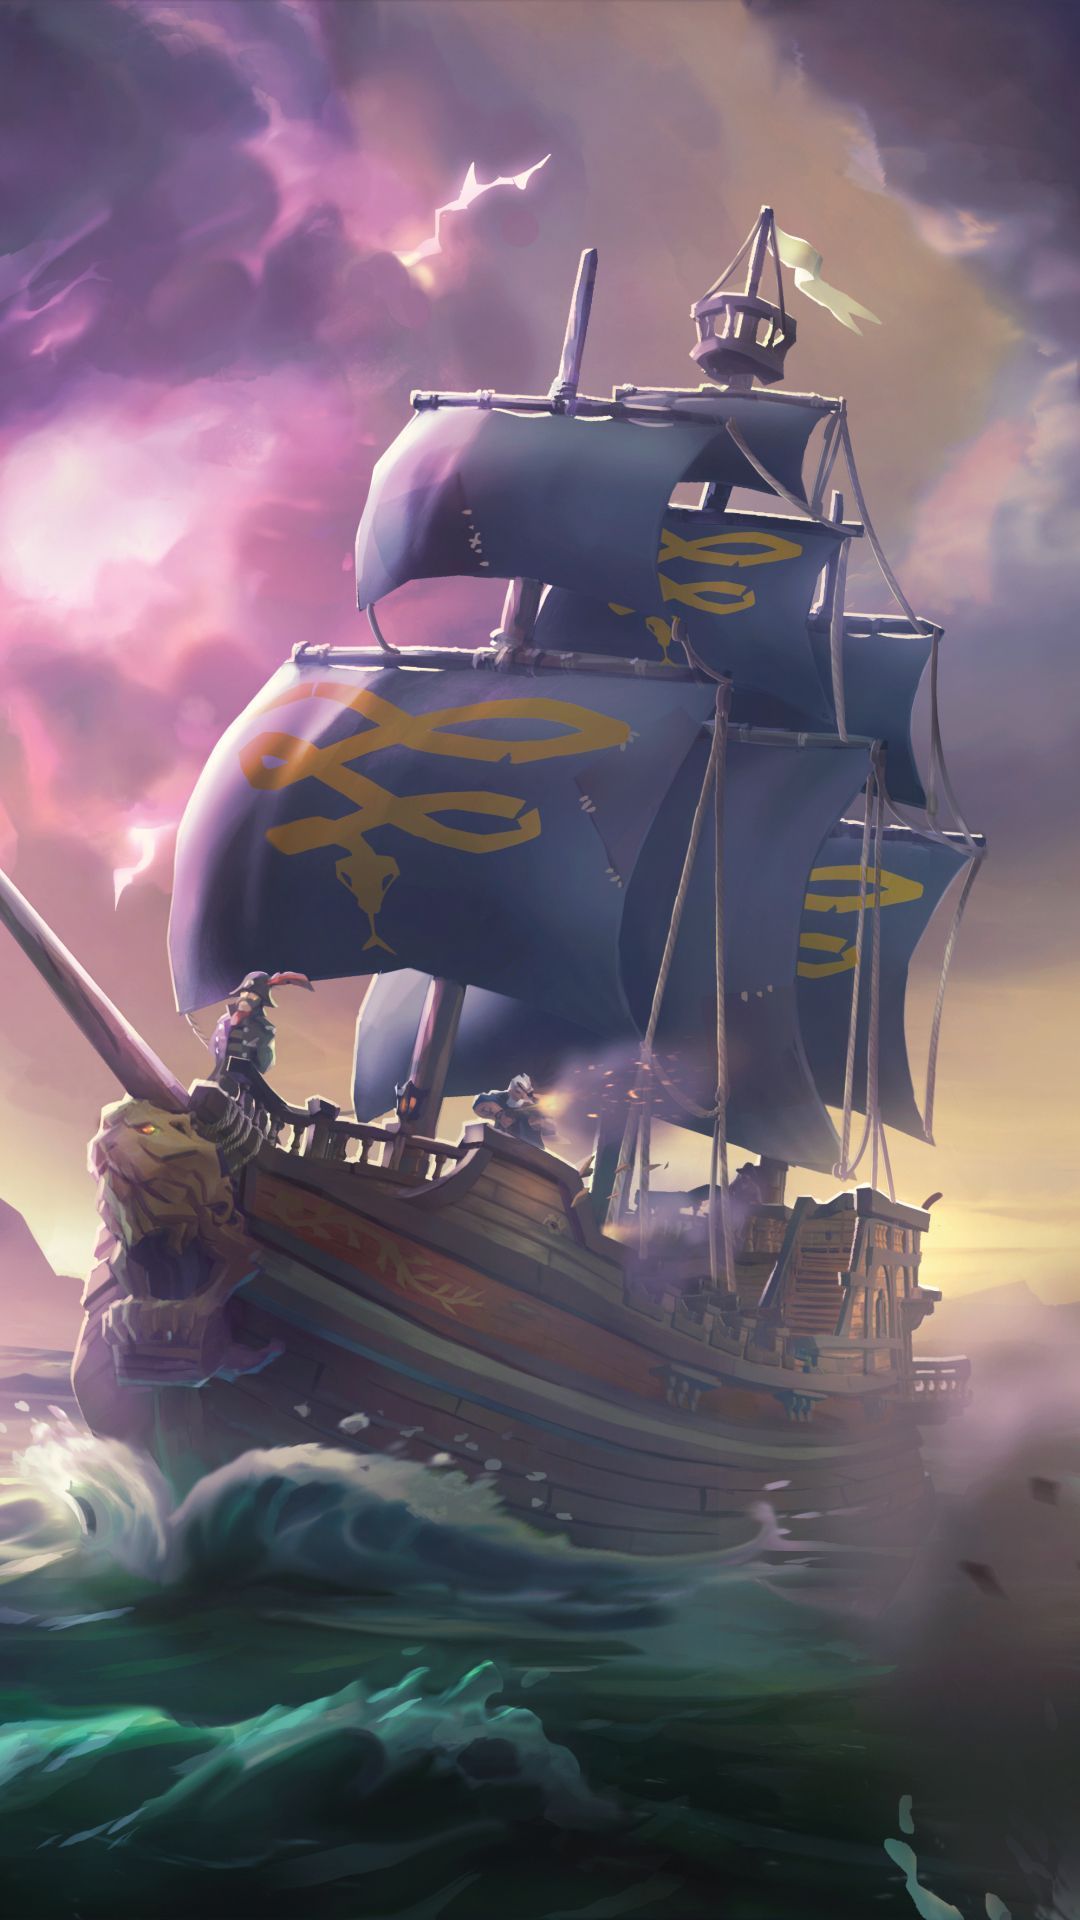 A sailboat is in the water with clouds - Pirate